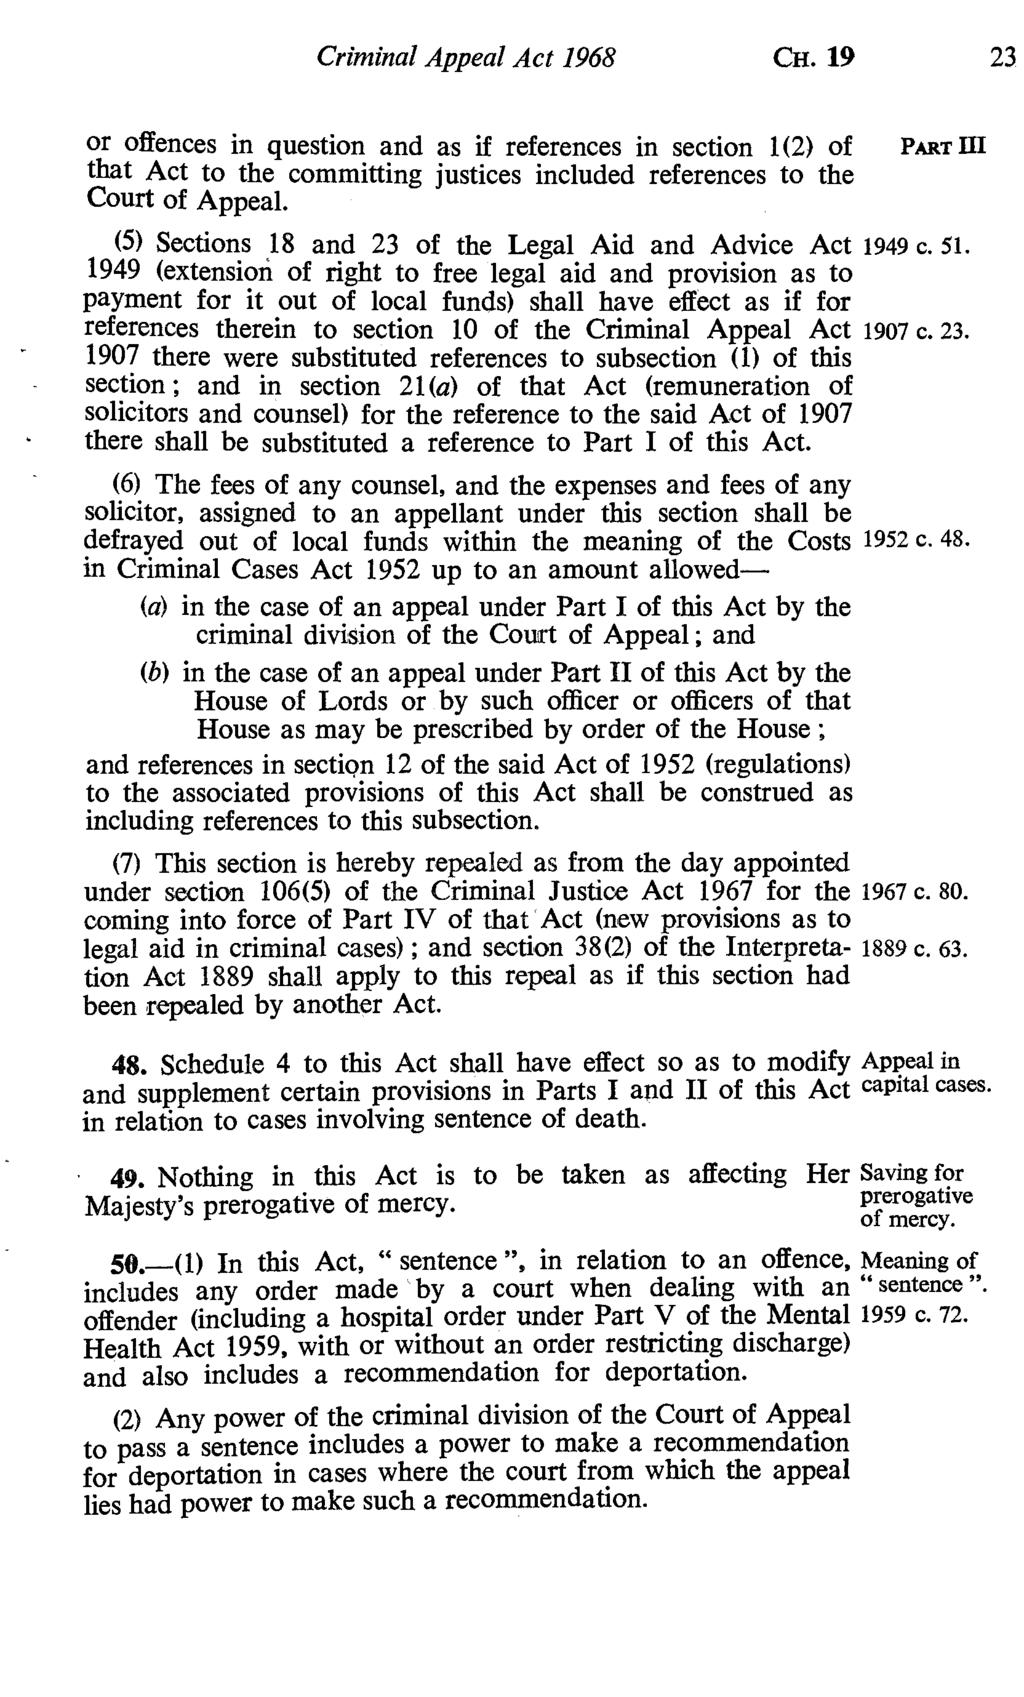 Criminal Appeal Act 1968 CH. 19 23 or offences in question and as if references in section 1(2) of that Act to the committing justices included references to the Court of Appeal.